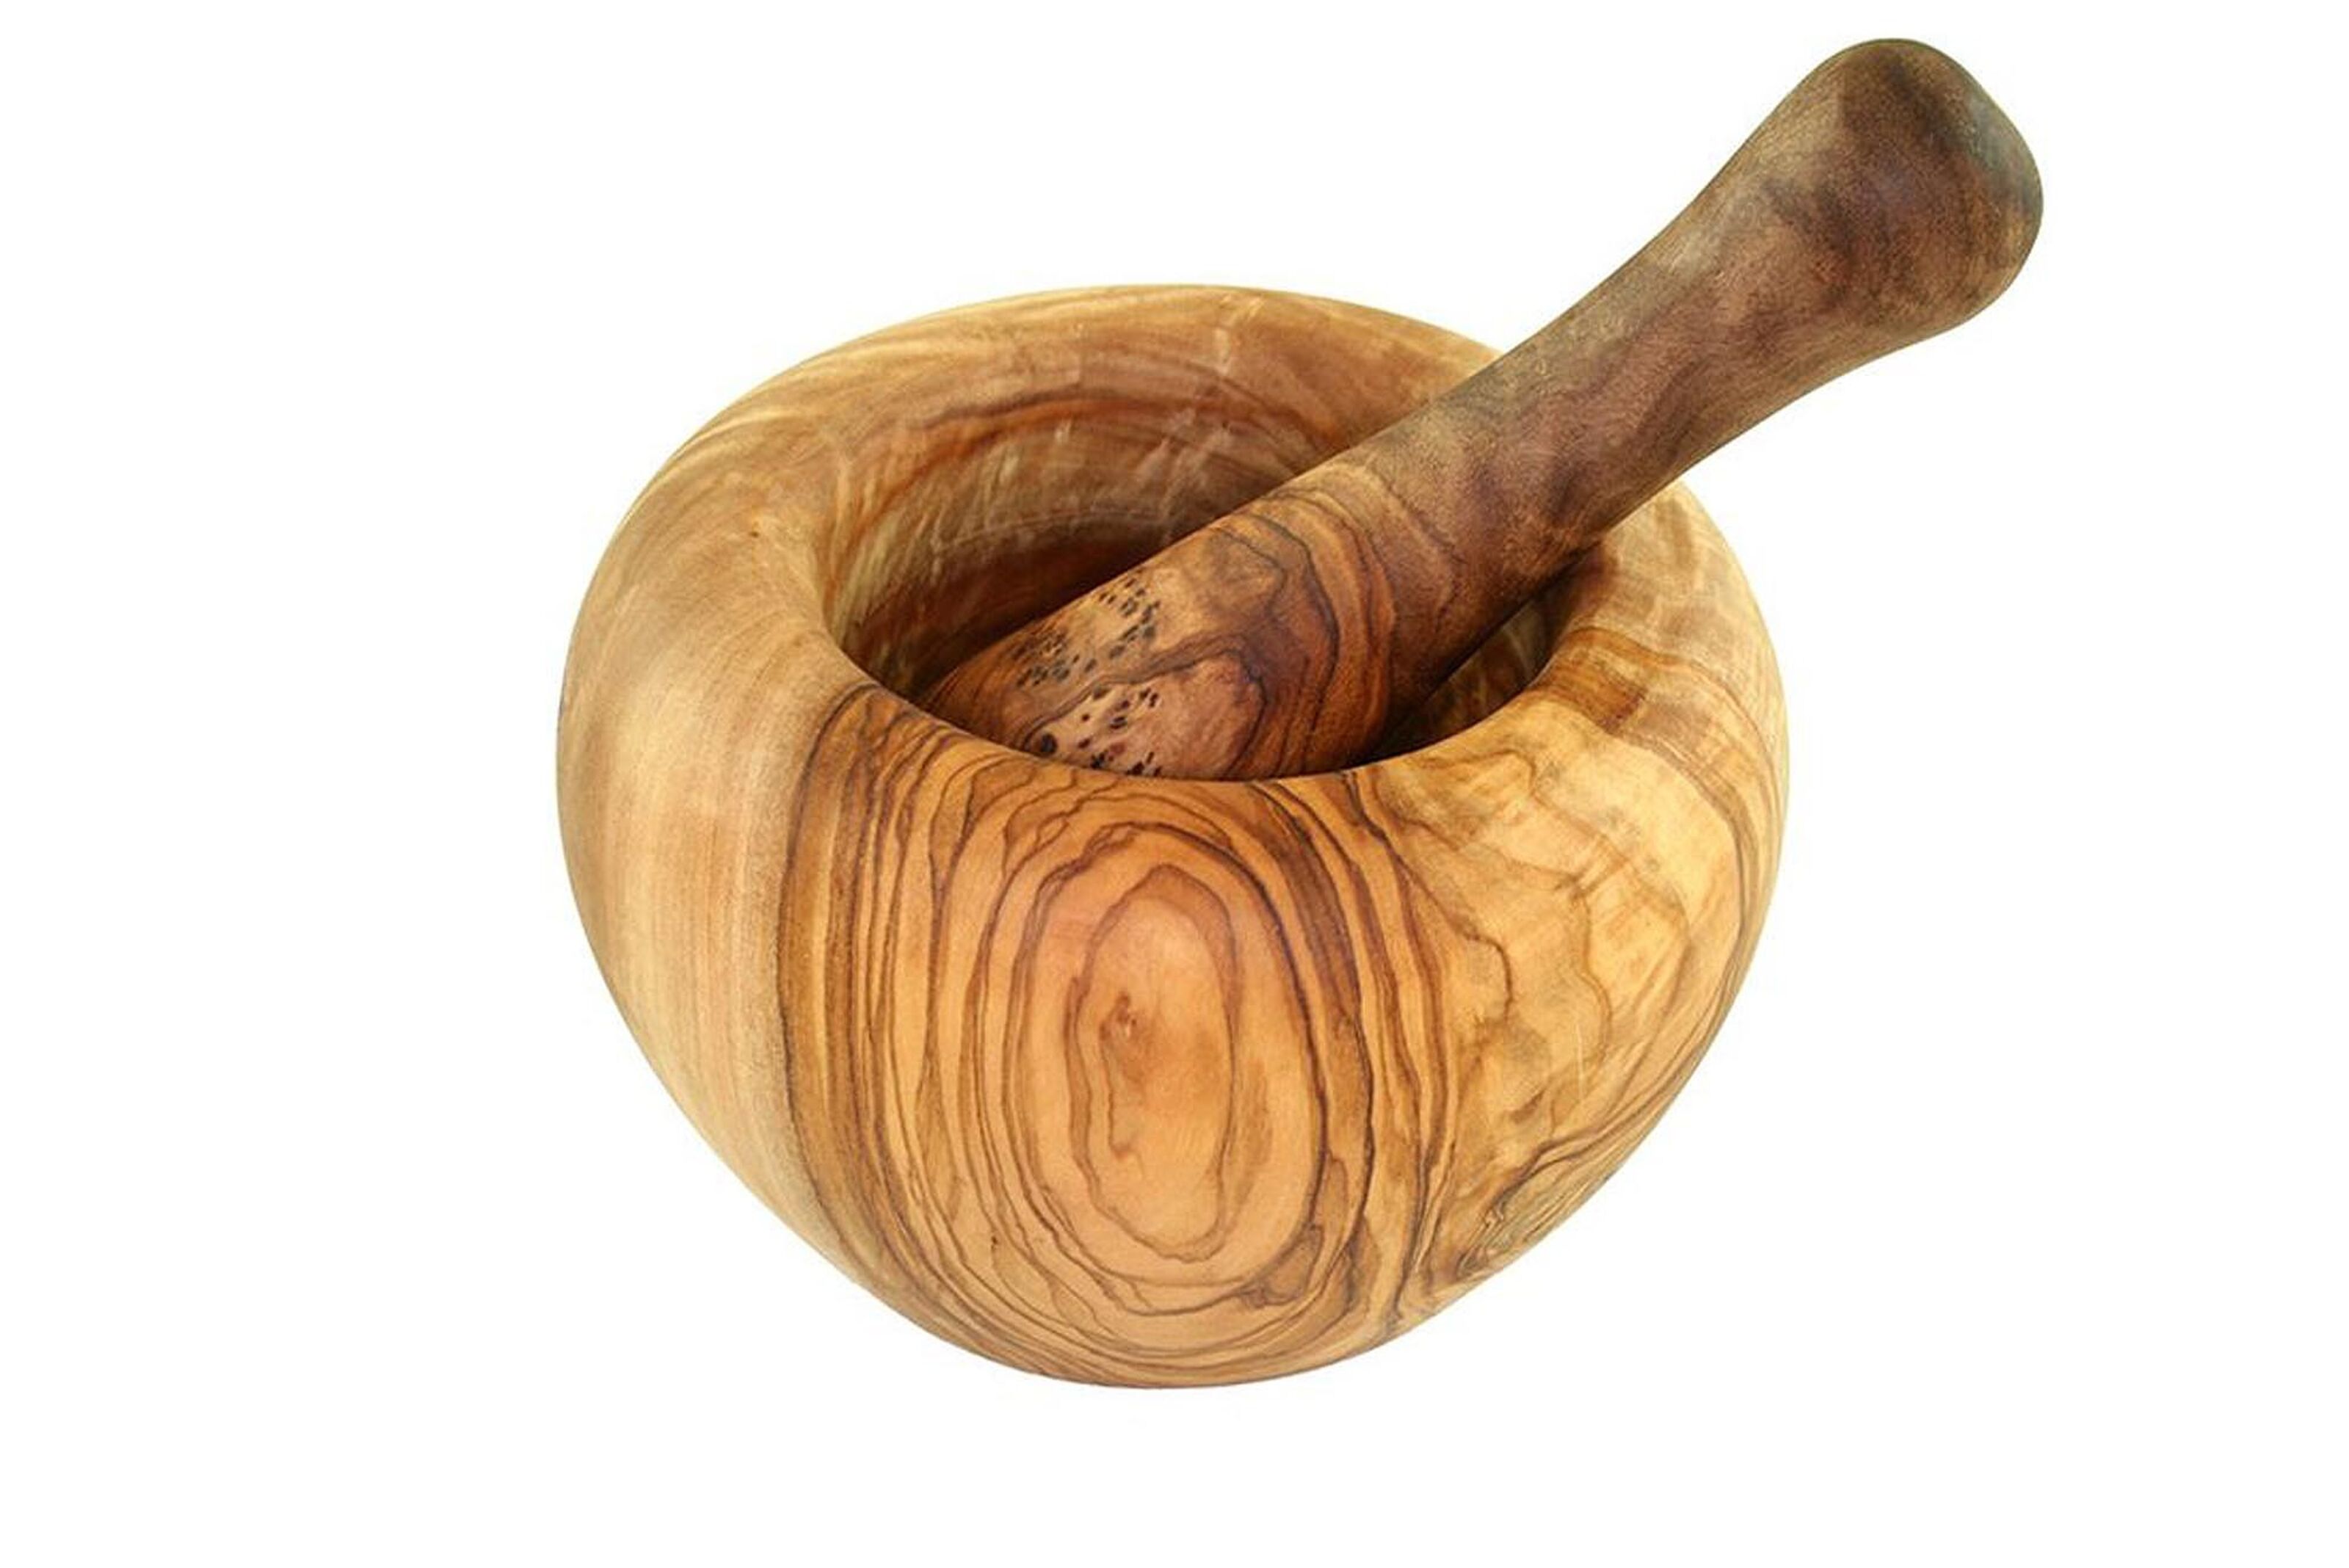 Mortar 12 wood cm Ø ground round of pestle including Buy olive made wholesale